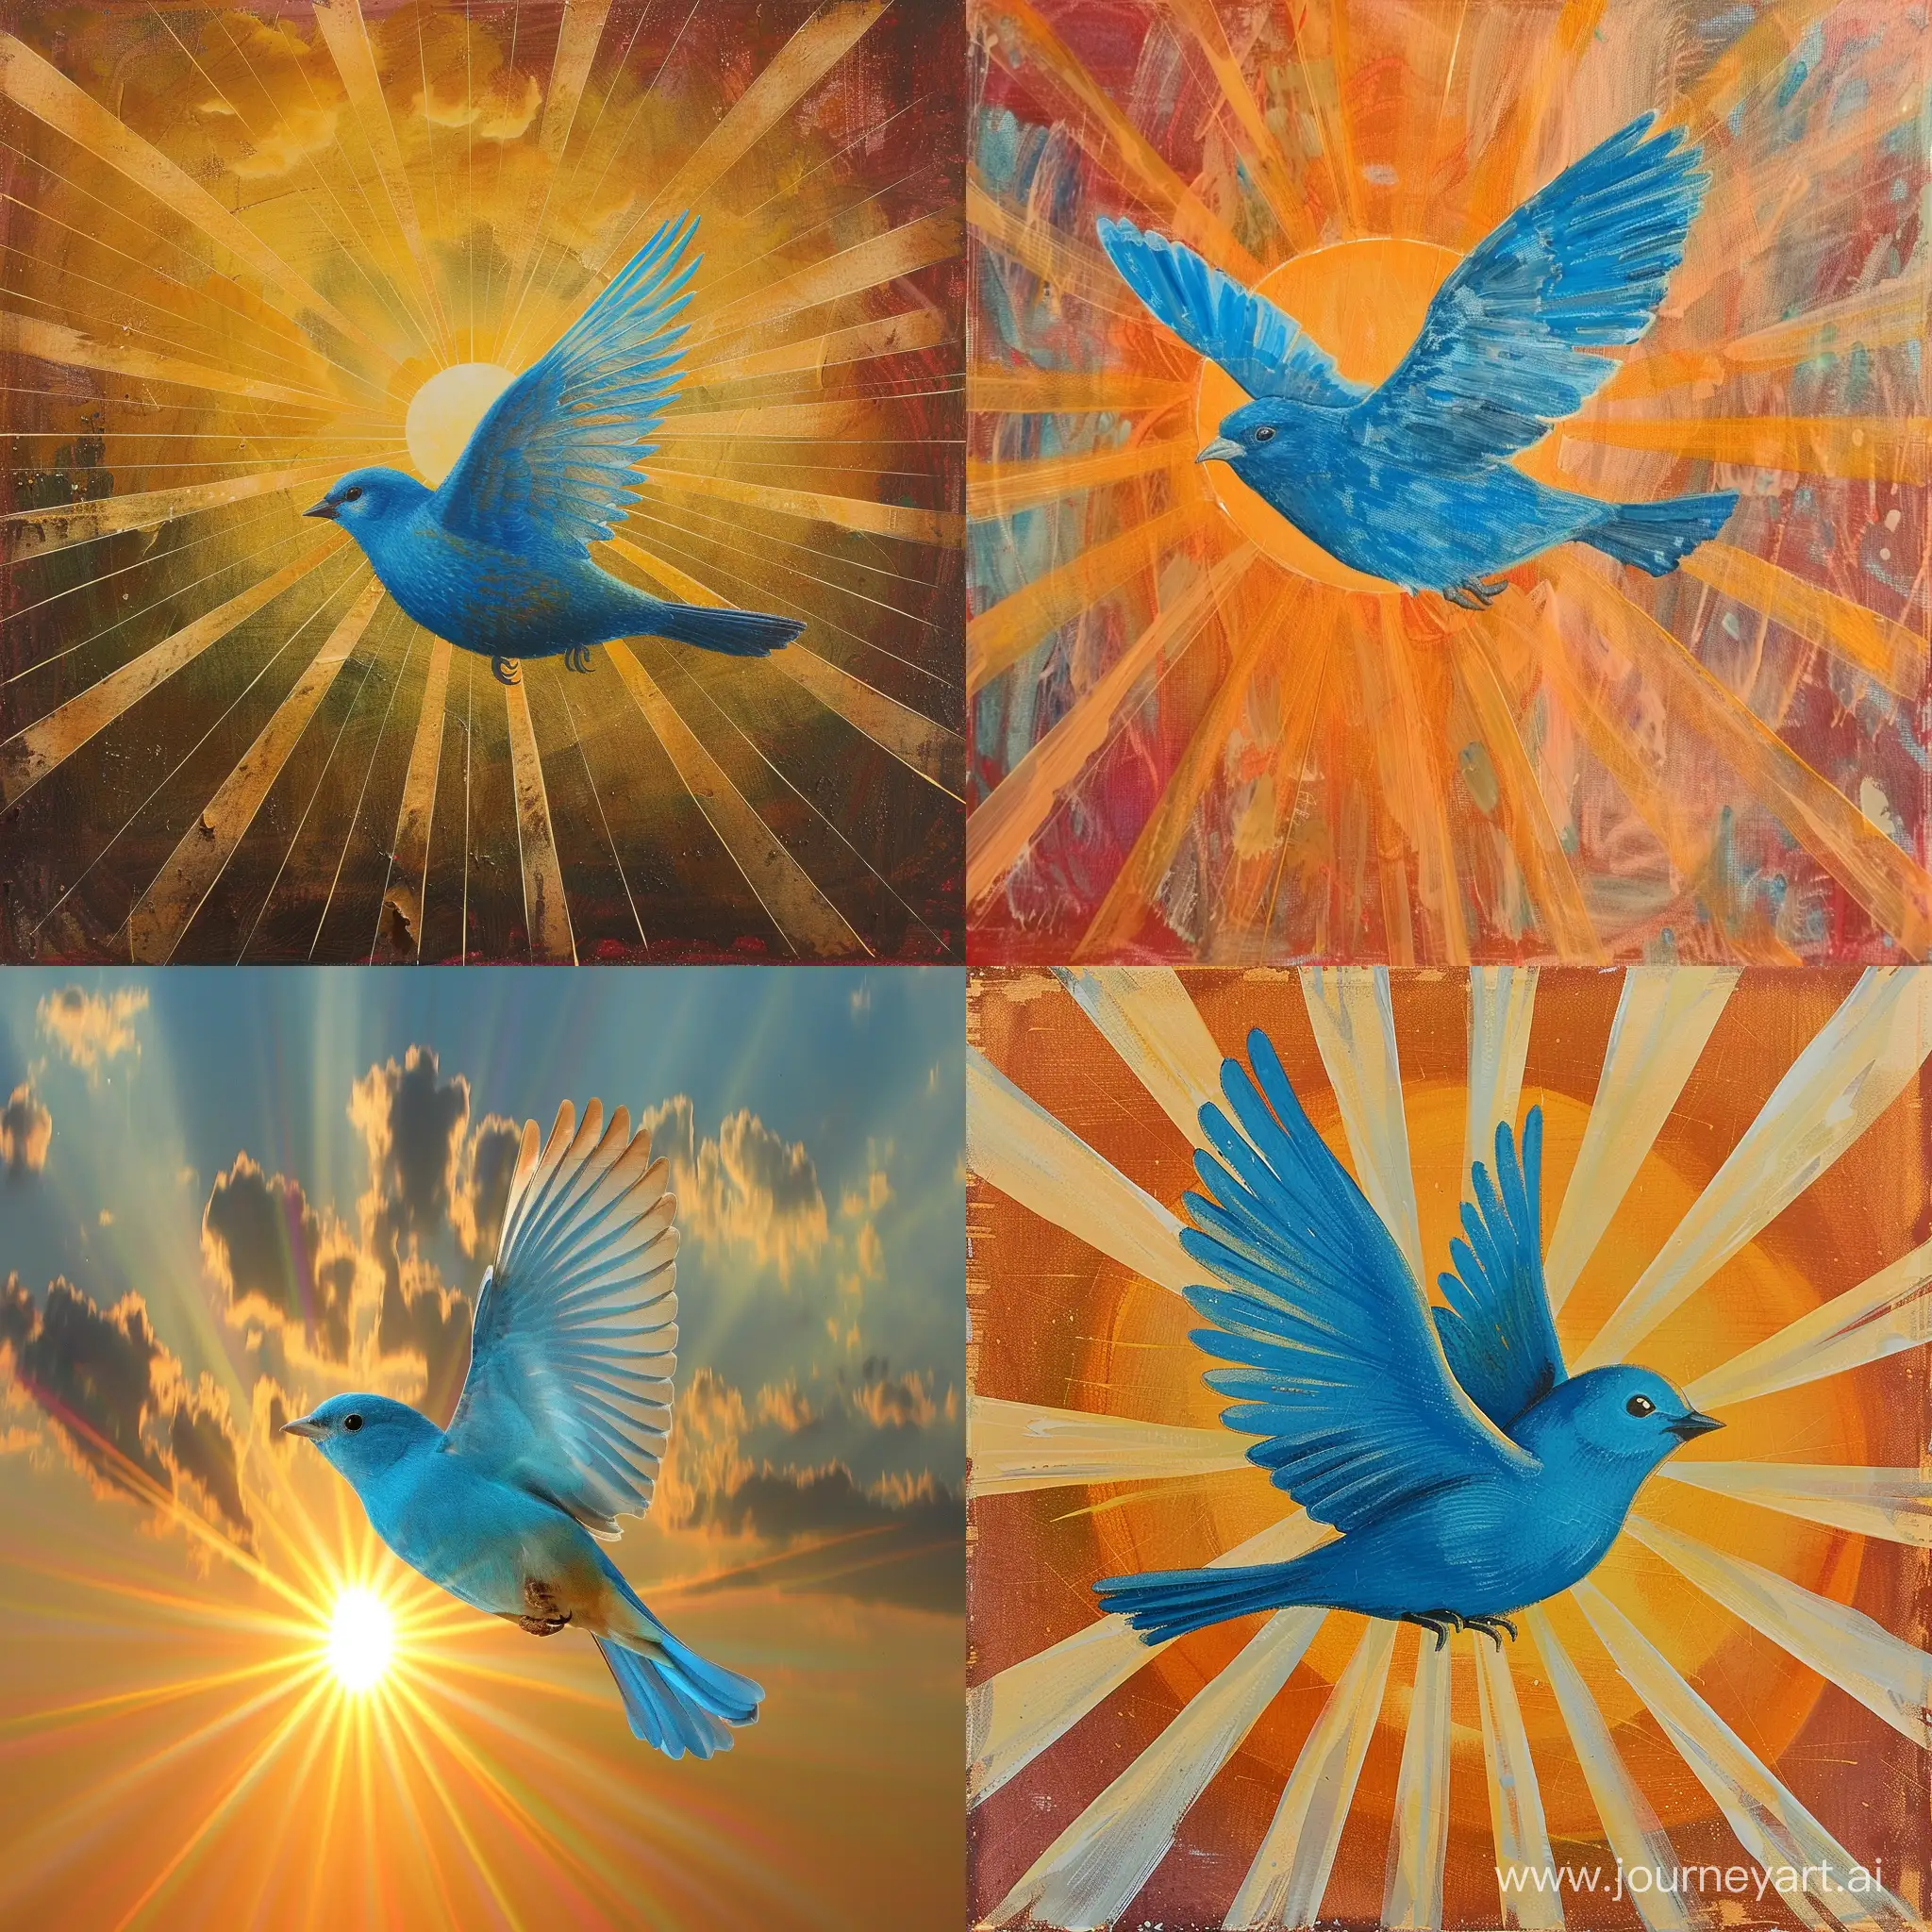 The blue bird of happiness flies across the morning sky illuminated by the rays of the rising sun.